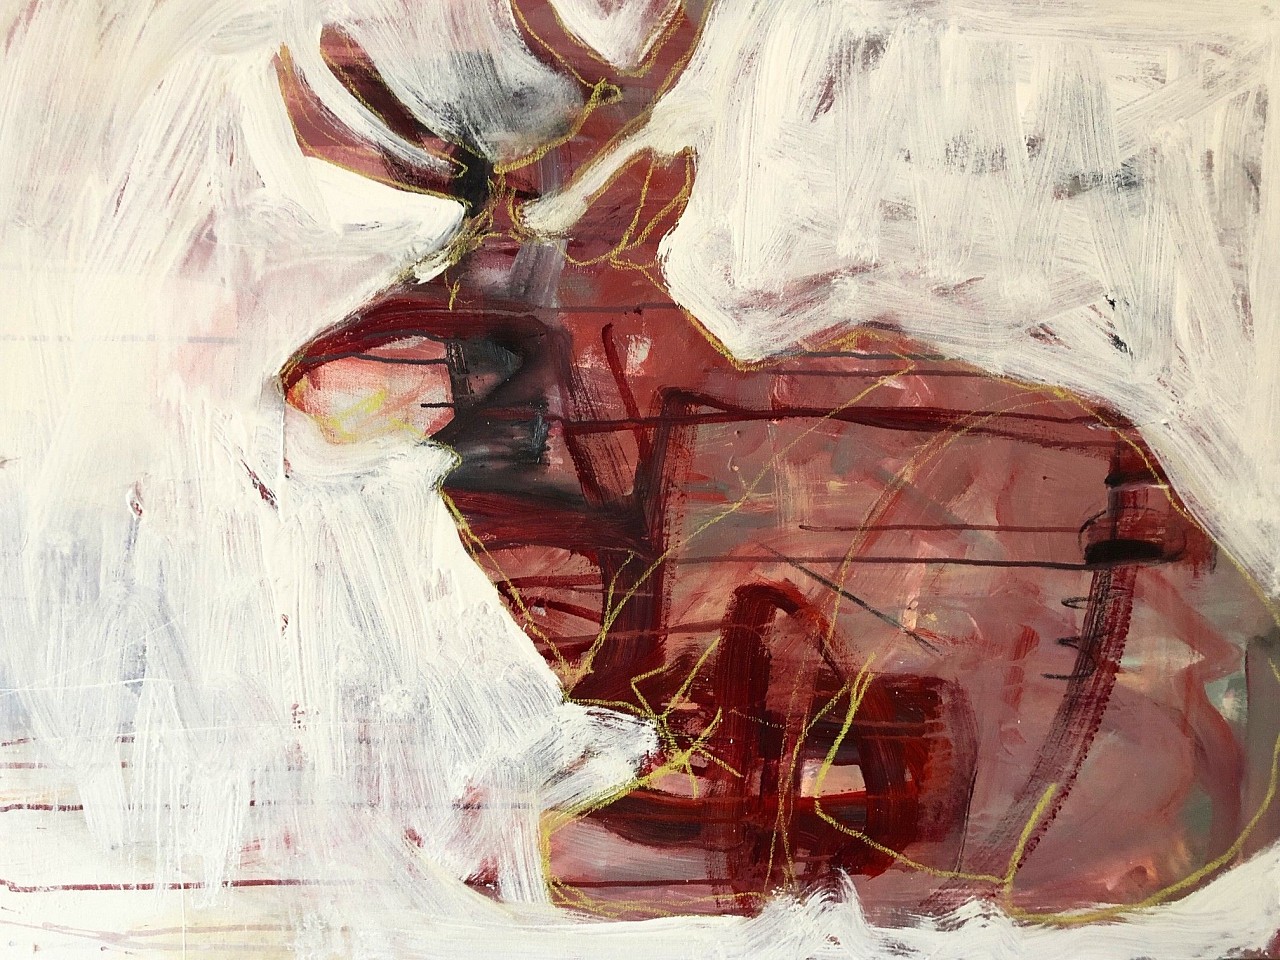 Helen Durant, Sitting Elk
Acrylic and Pastel on Canvas, 30 x 40 in.
7204